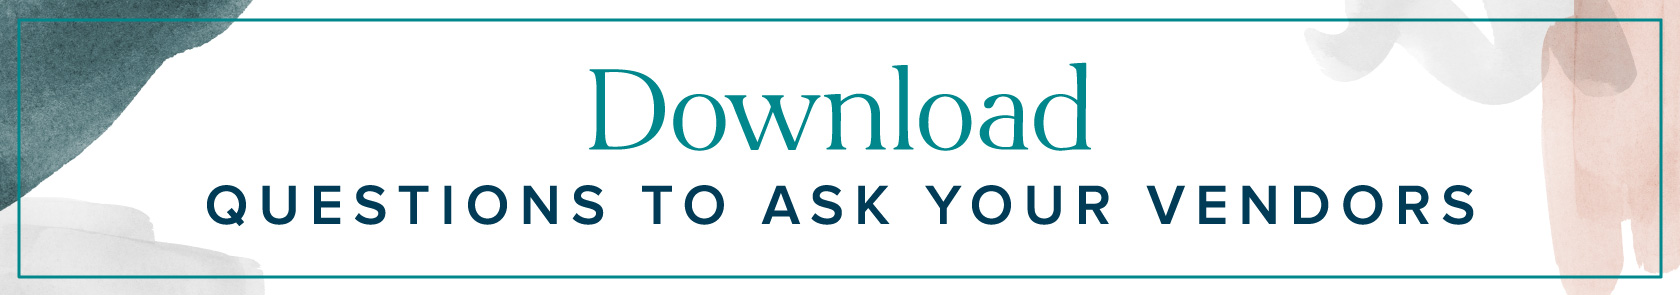 download questions to ask your vendor